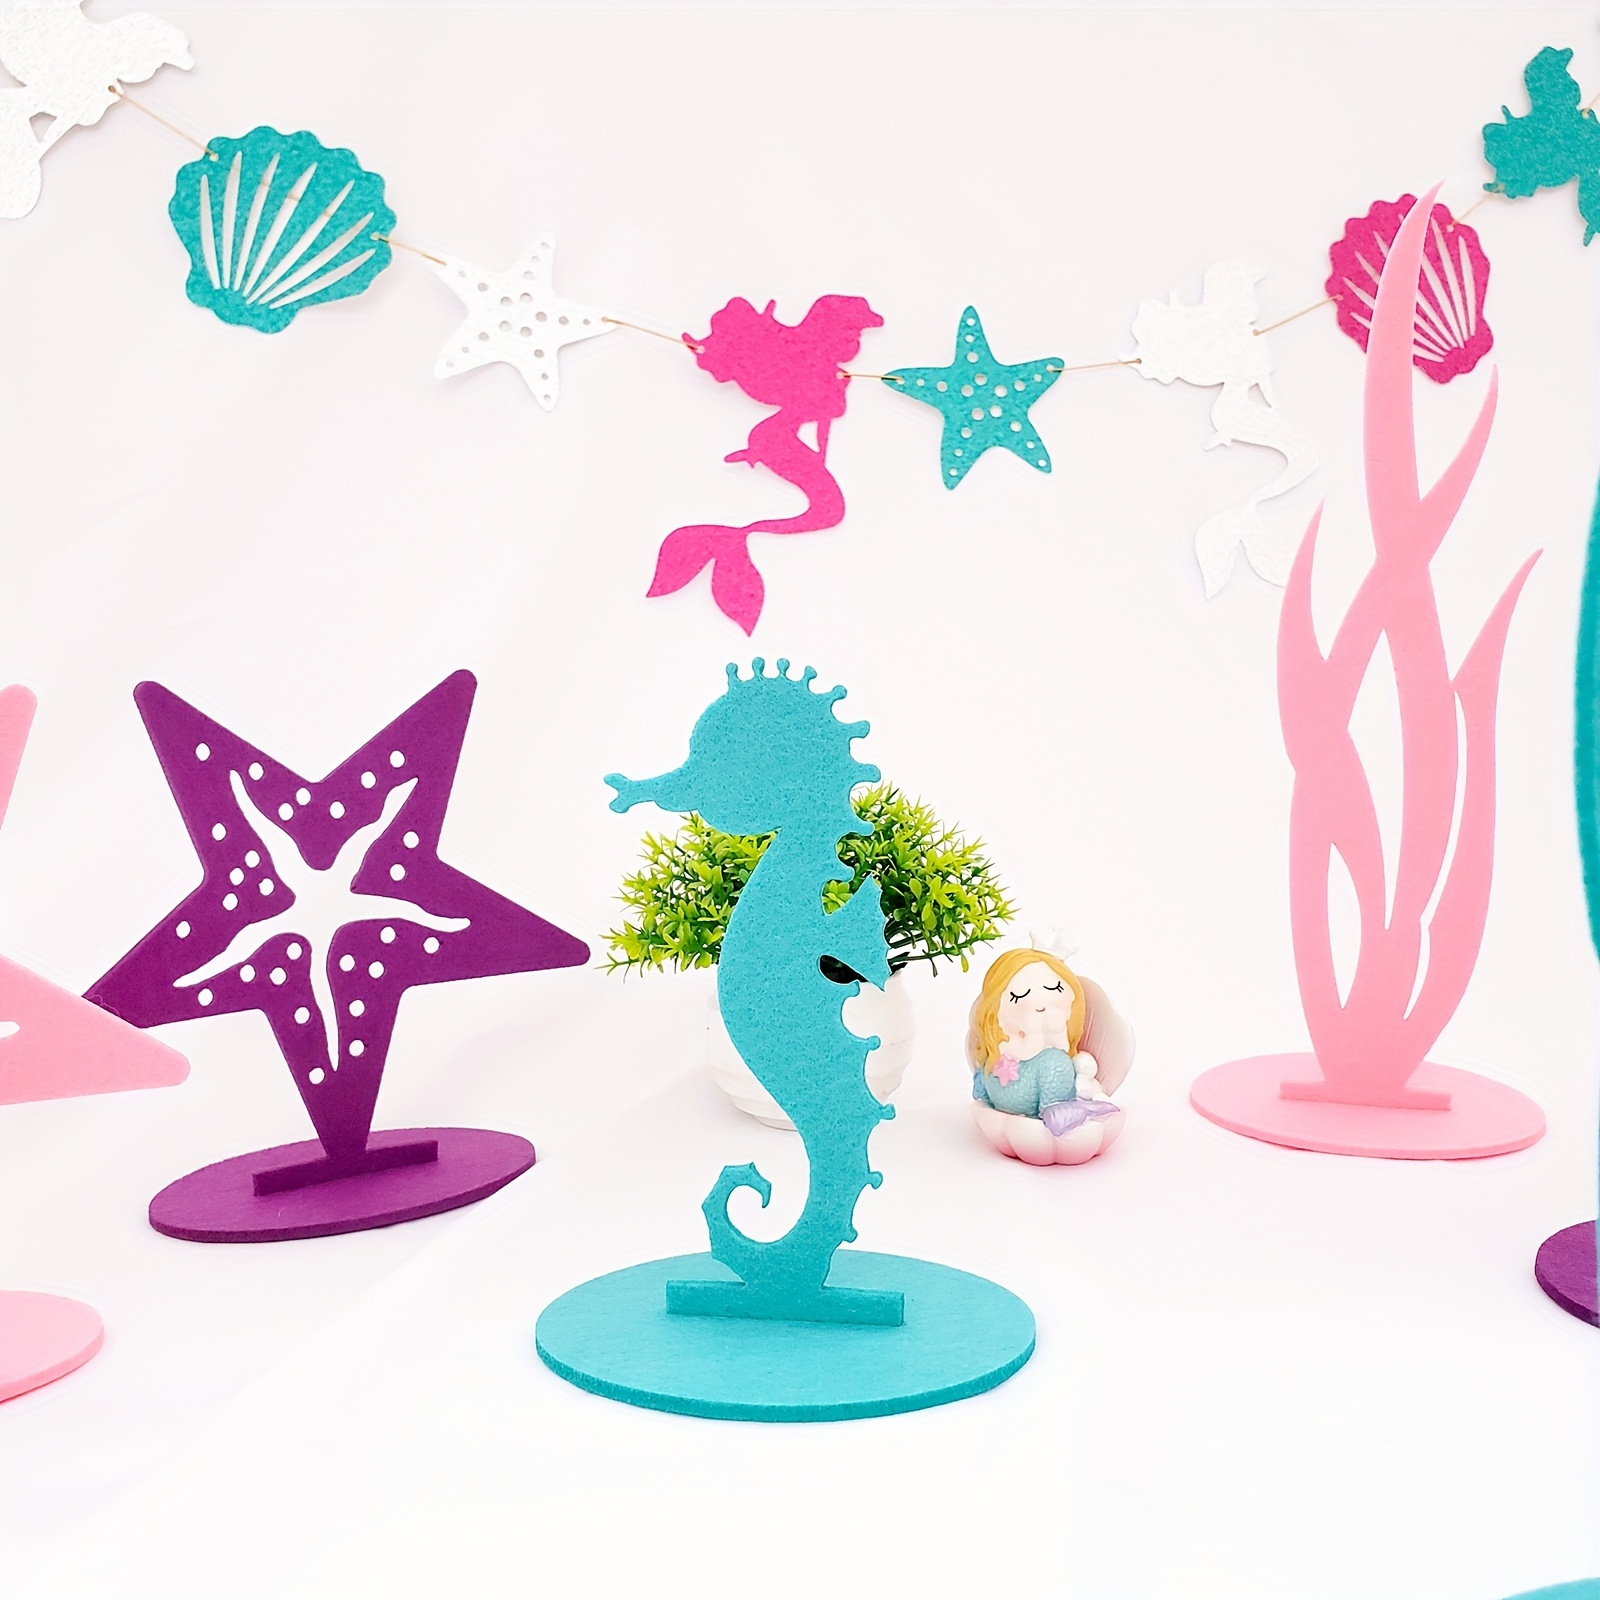  12 Pcs Under The Sea Party Decorations Birthday Decorations  Honeycomb Centerpieces for Kids Under the Sea Table Toppers Decorations  Ocean Themed : Toys & Games